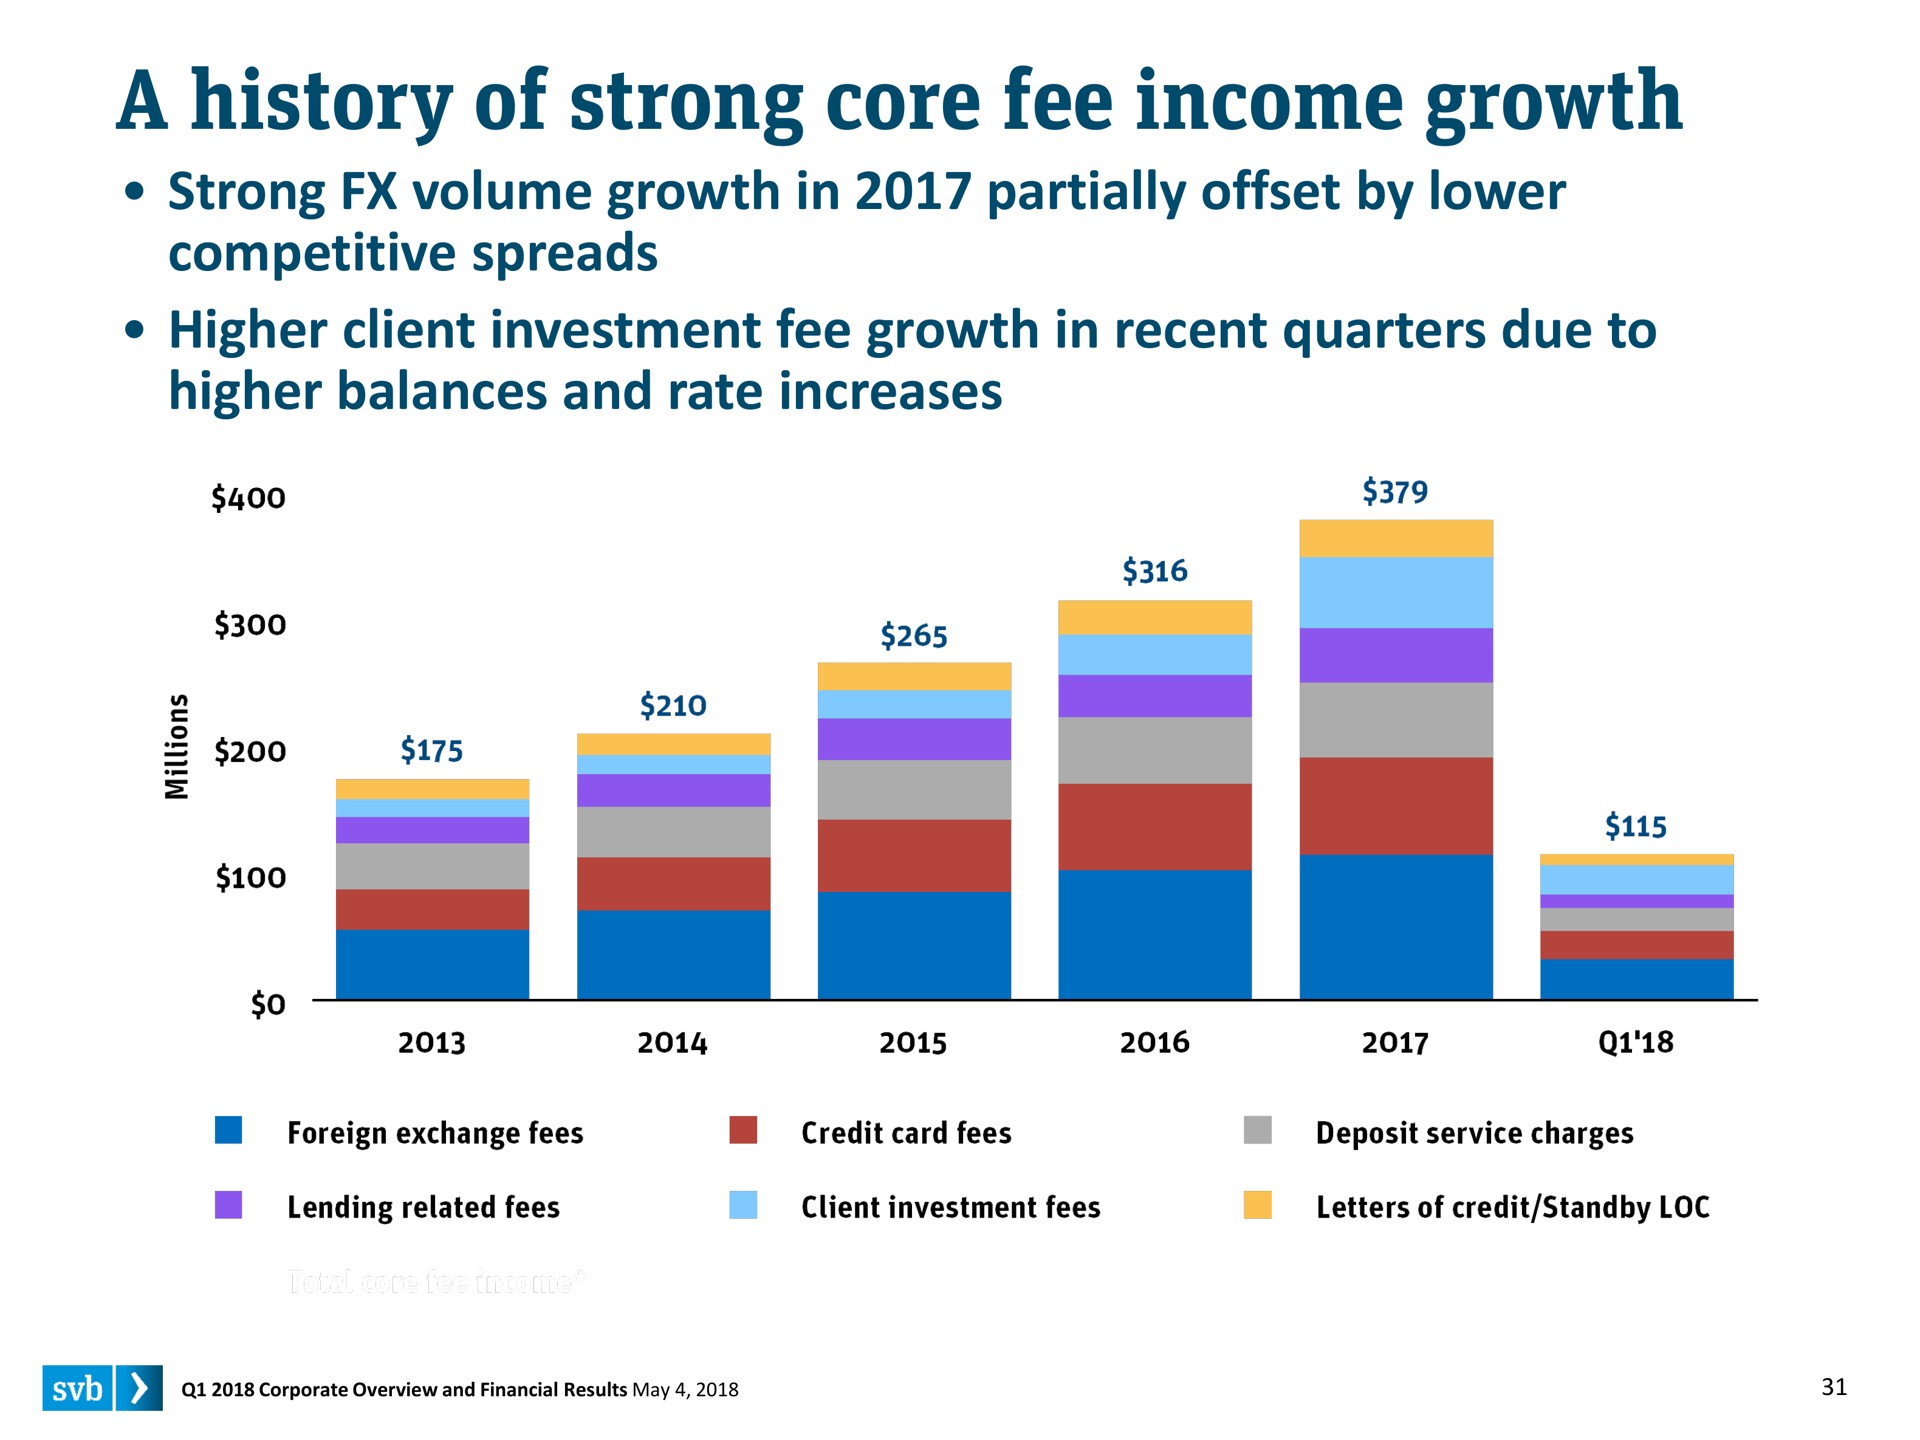 a history of strong core fee income growth strong volume growth in partially offset by lower competitive spreads higher client investment fee growth in recent quarters due to higher balances and rate increases | Silicon Valley Bank